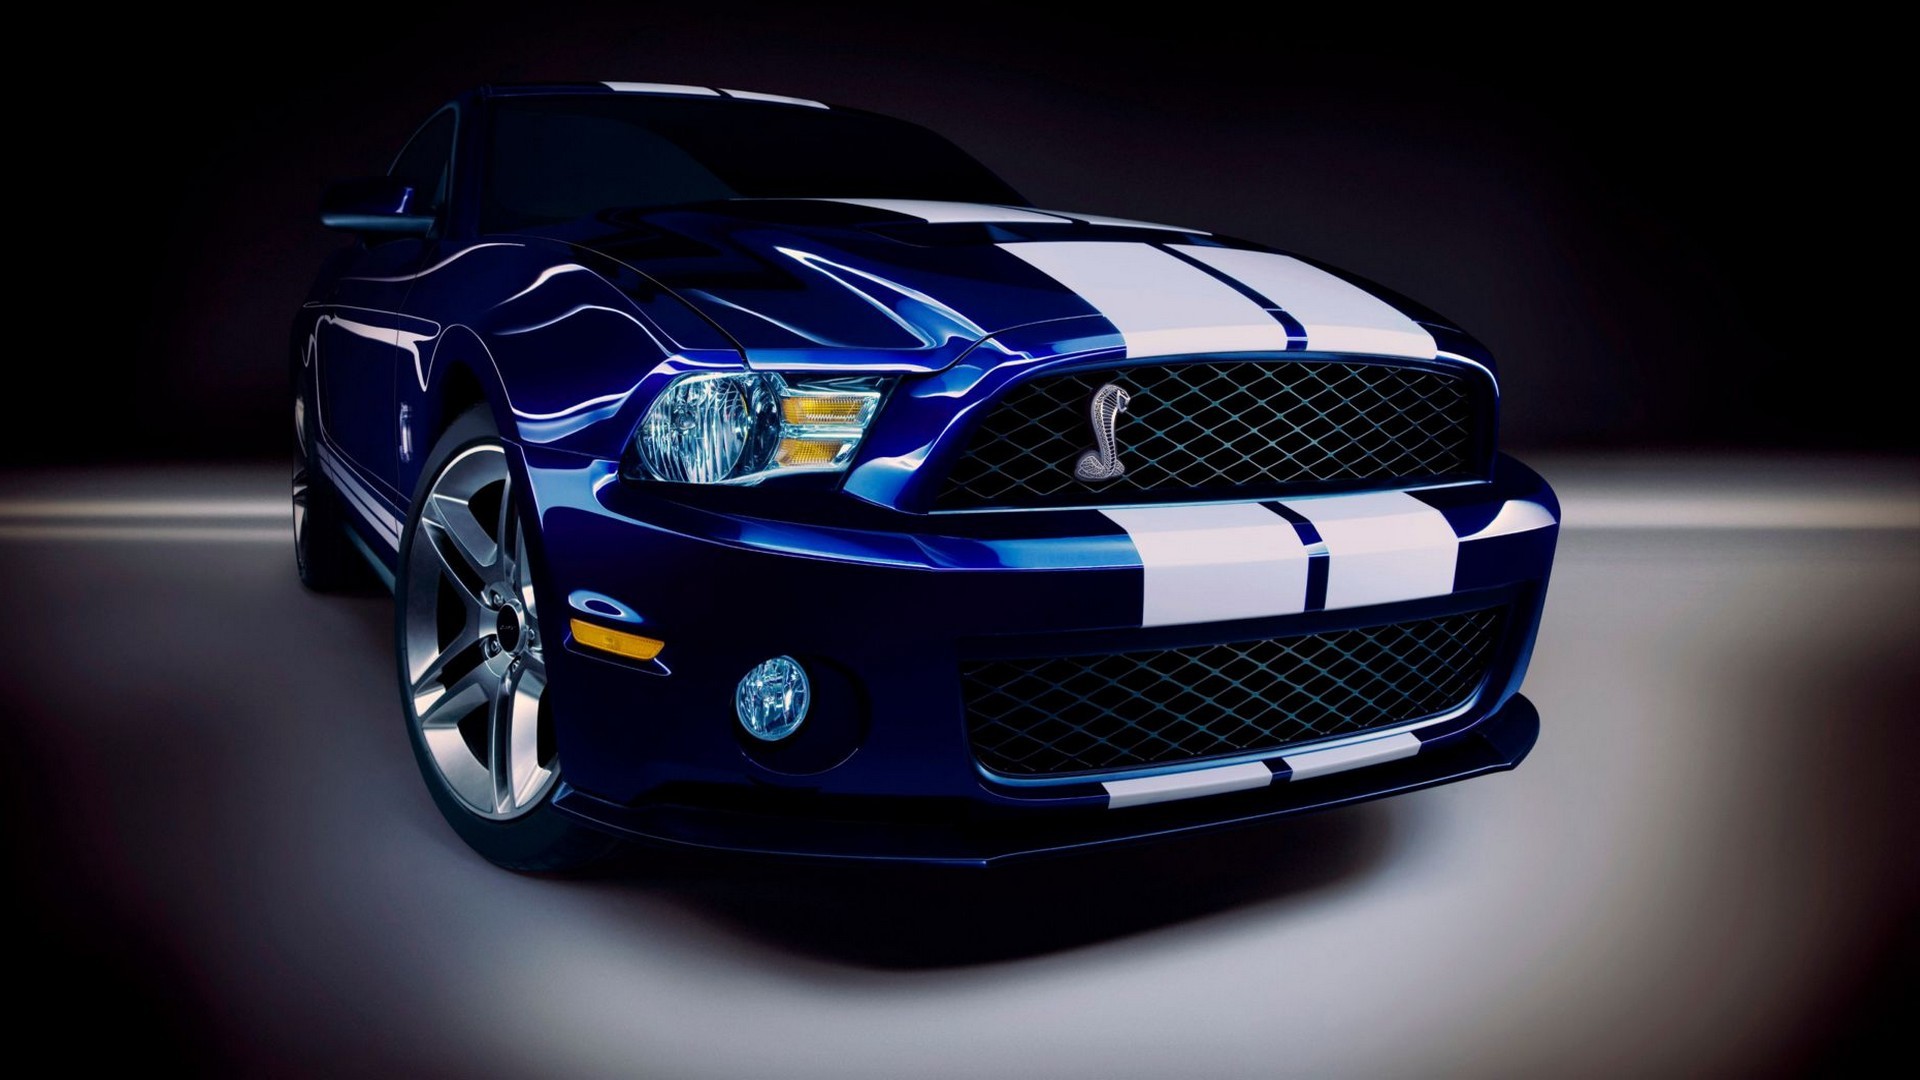 Great Ford Mustang Shelby Wallpaper Full HD Pictures